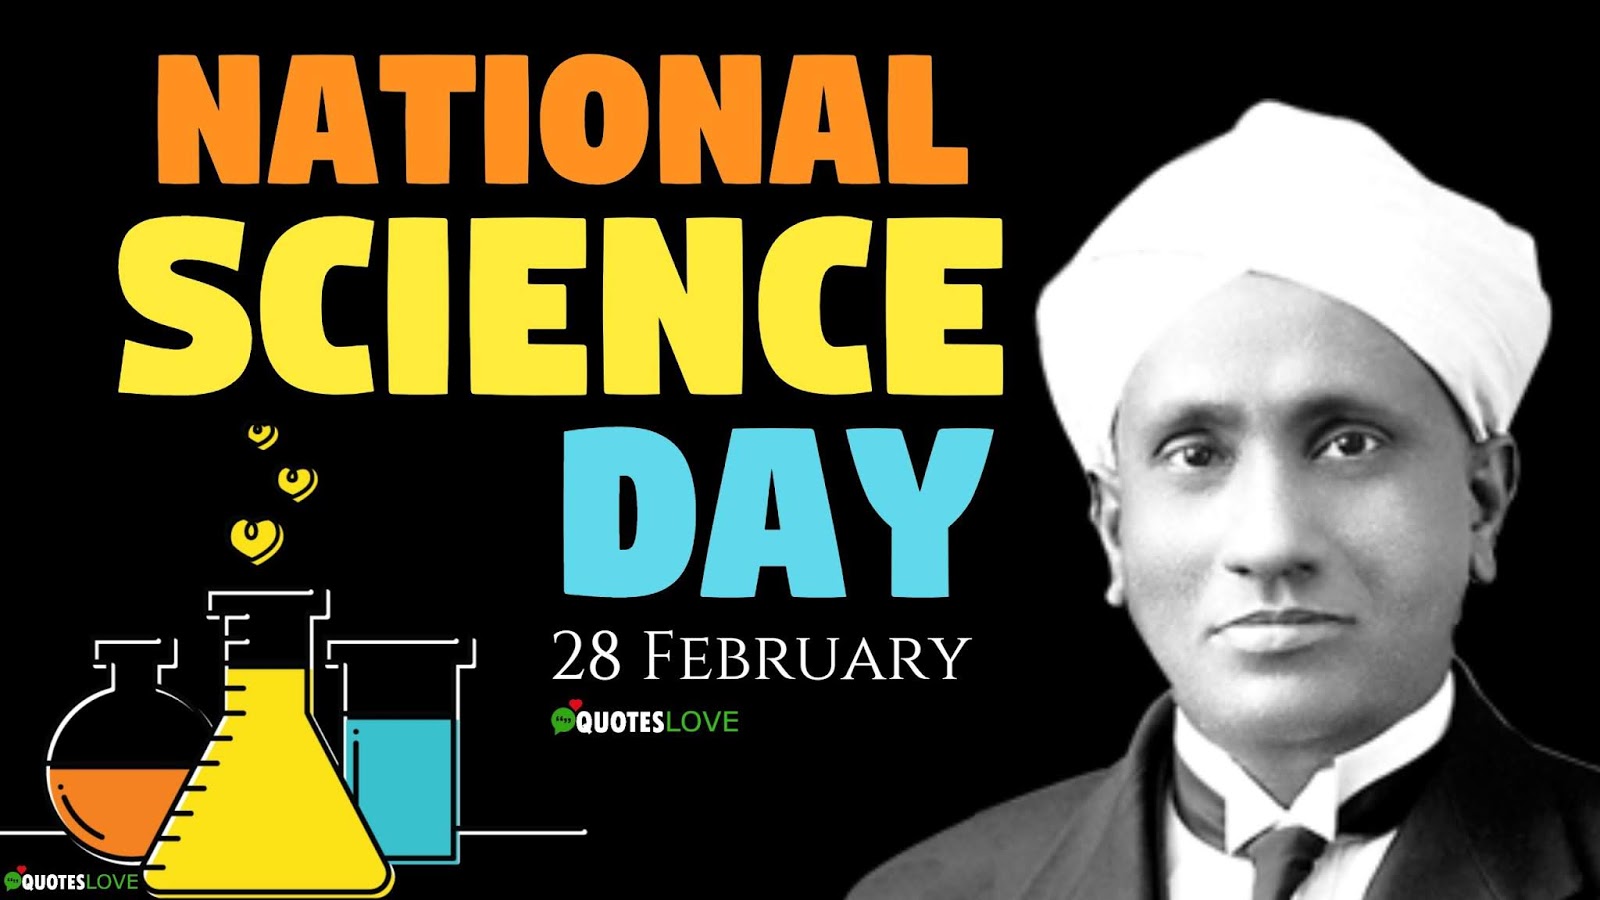 (Best) National Science Day 2021: Quotes, Wishes, Messages, Speech, Image, Theme, Drawing, Poster, Logo